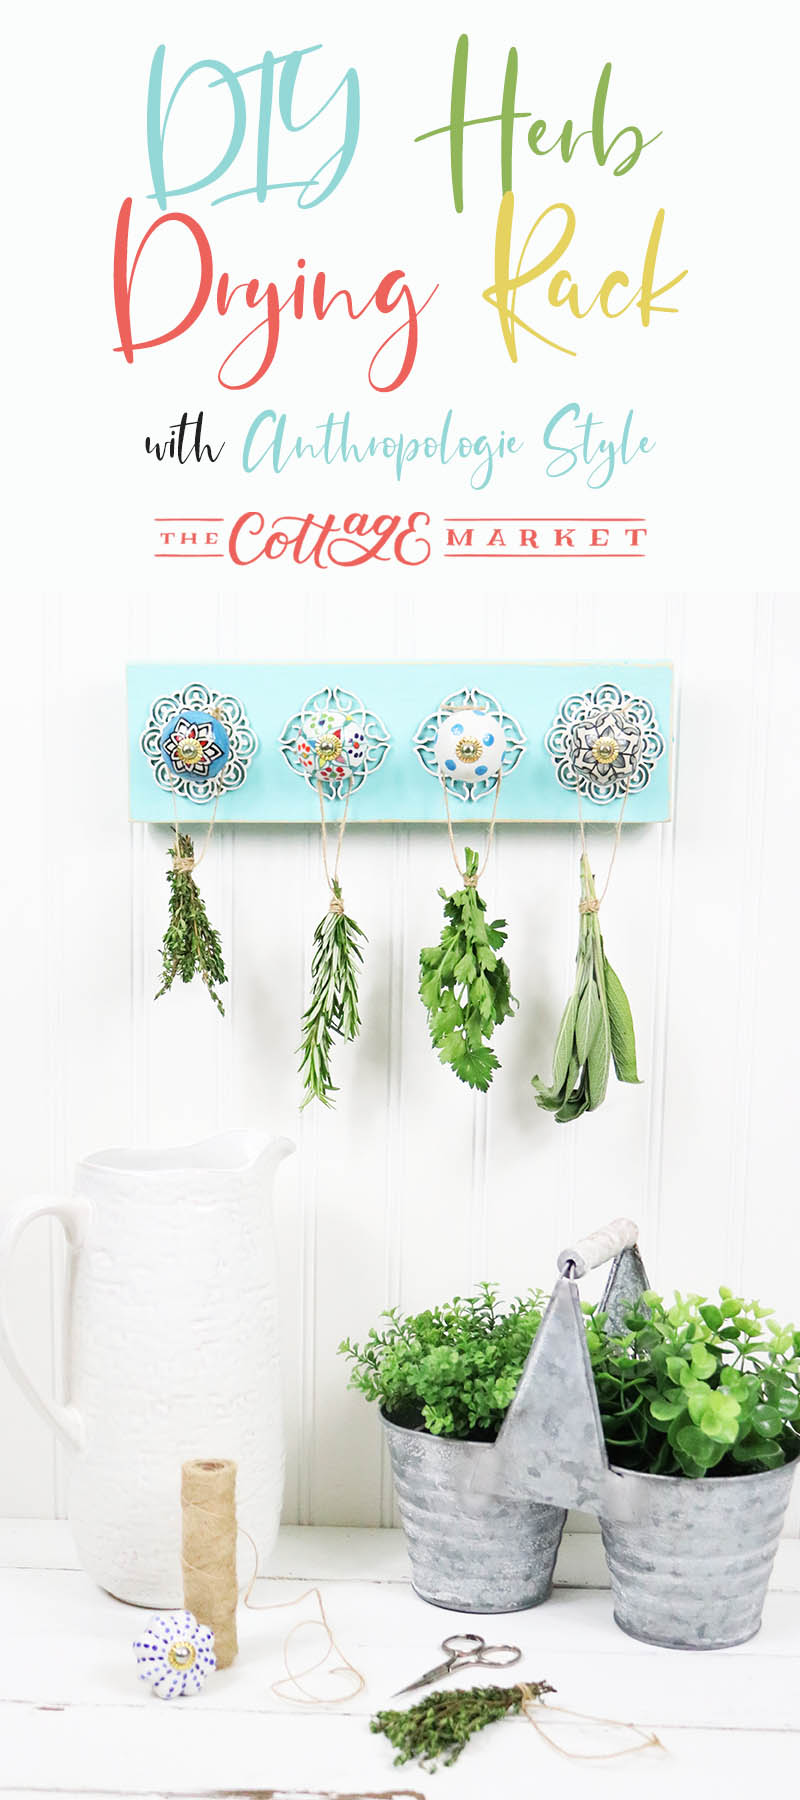 This DIY Herb Drying Rack is perfect for the Cook, Gardener or anyone that just loves Herbs in their daily cooking and loves a pretty new wall hanging for the Kitchen.